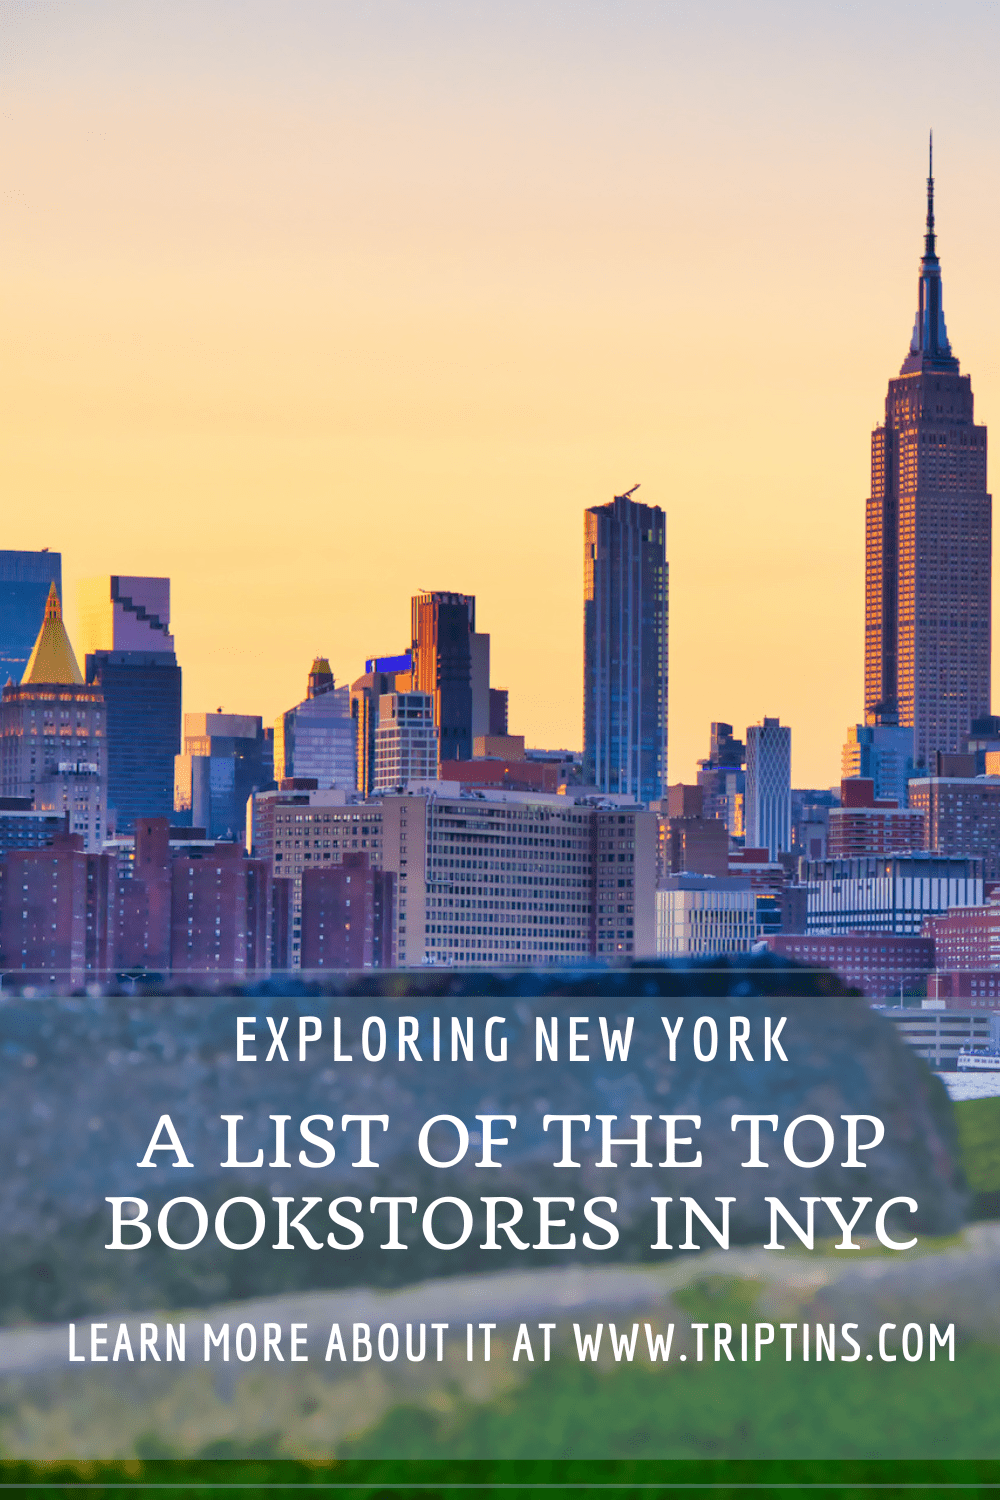 Bookstores in NYC